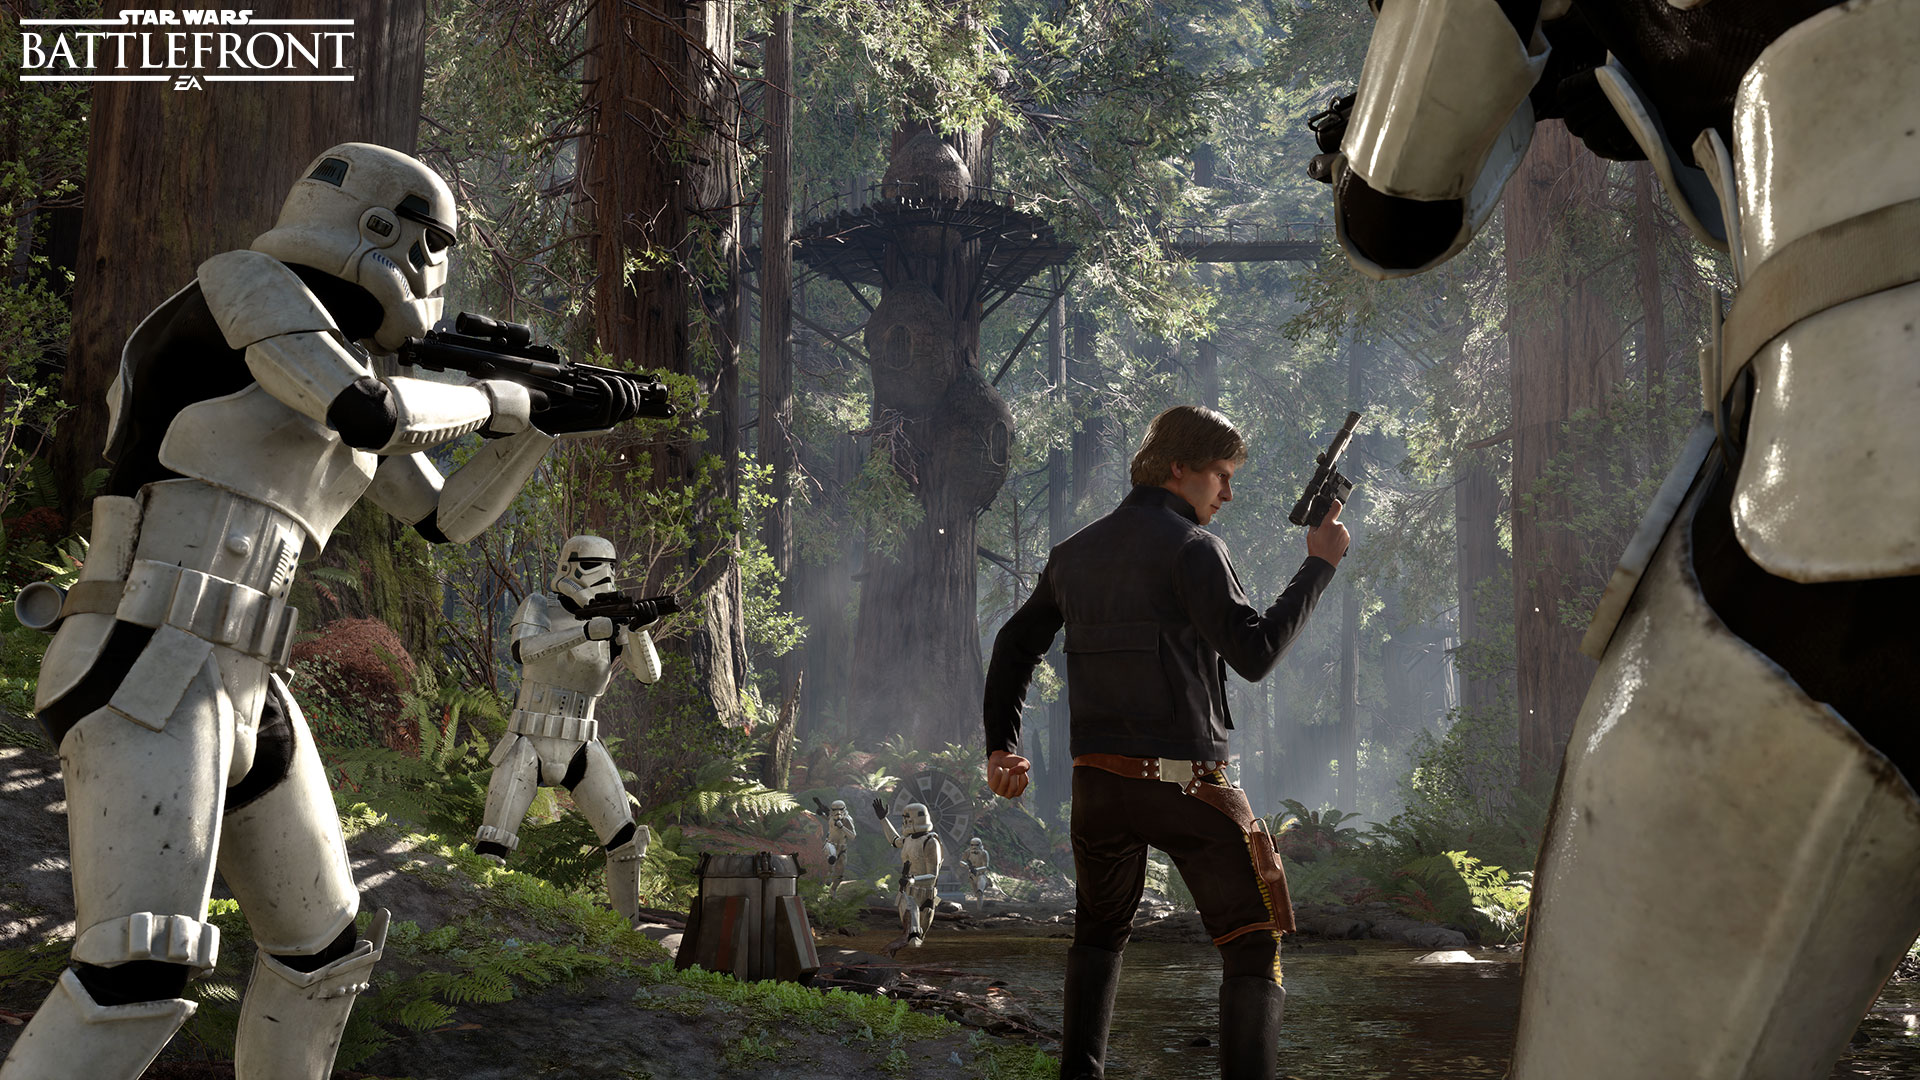 How Han Solo, Leia, And Palpatine Will Work In Star Wars: Battlefront